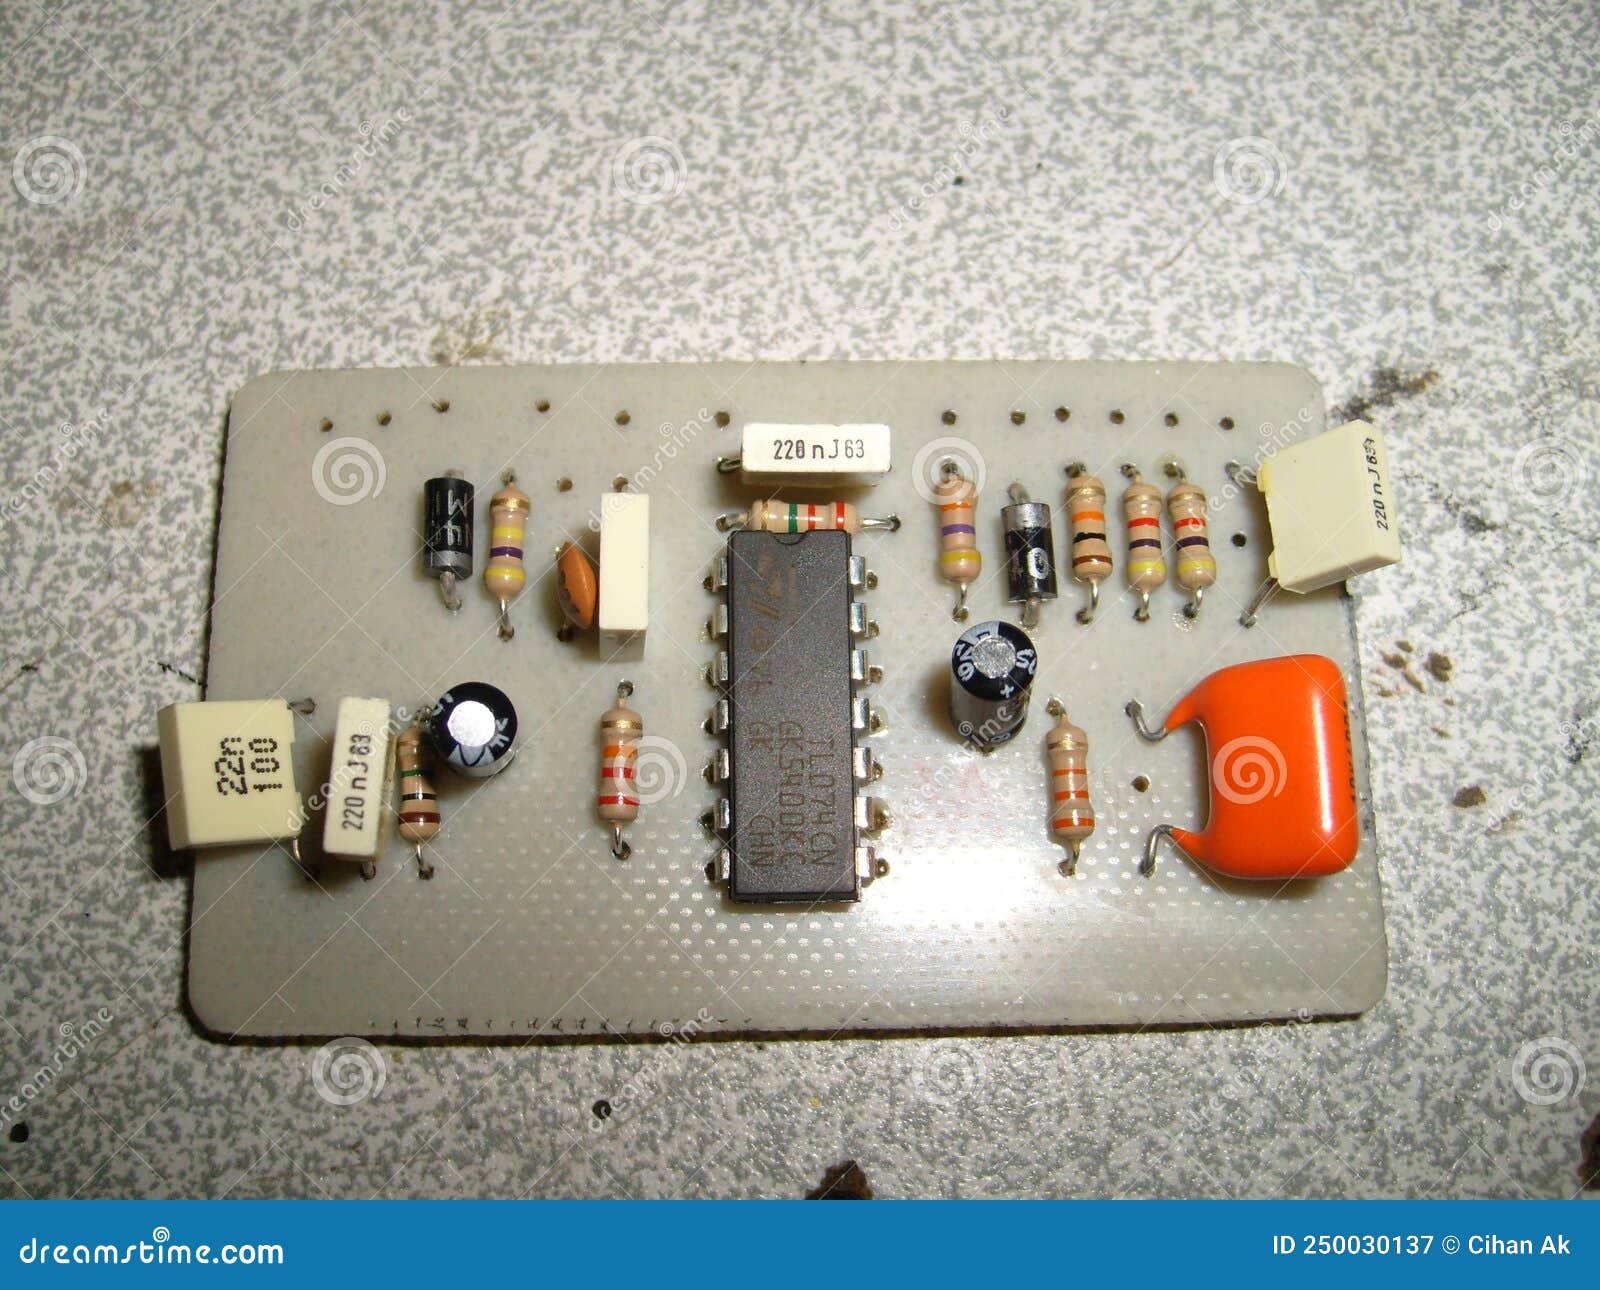 tube amplifier head and wirring parts transformers tube sockets pcb 29